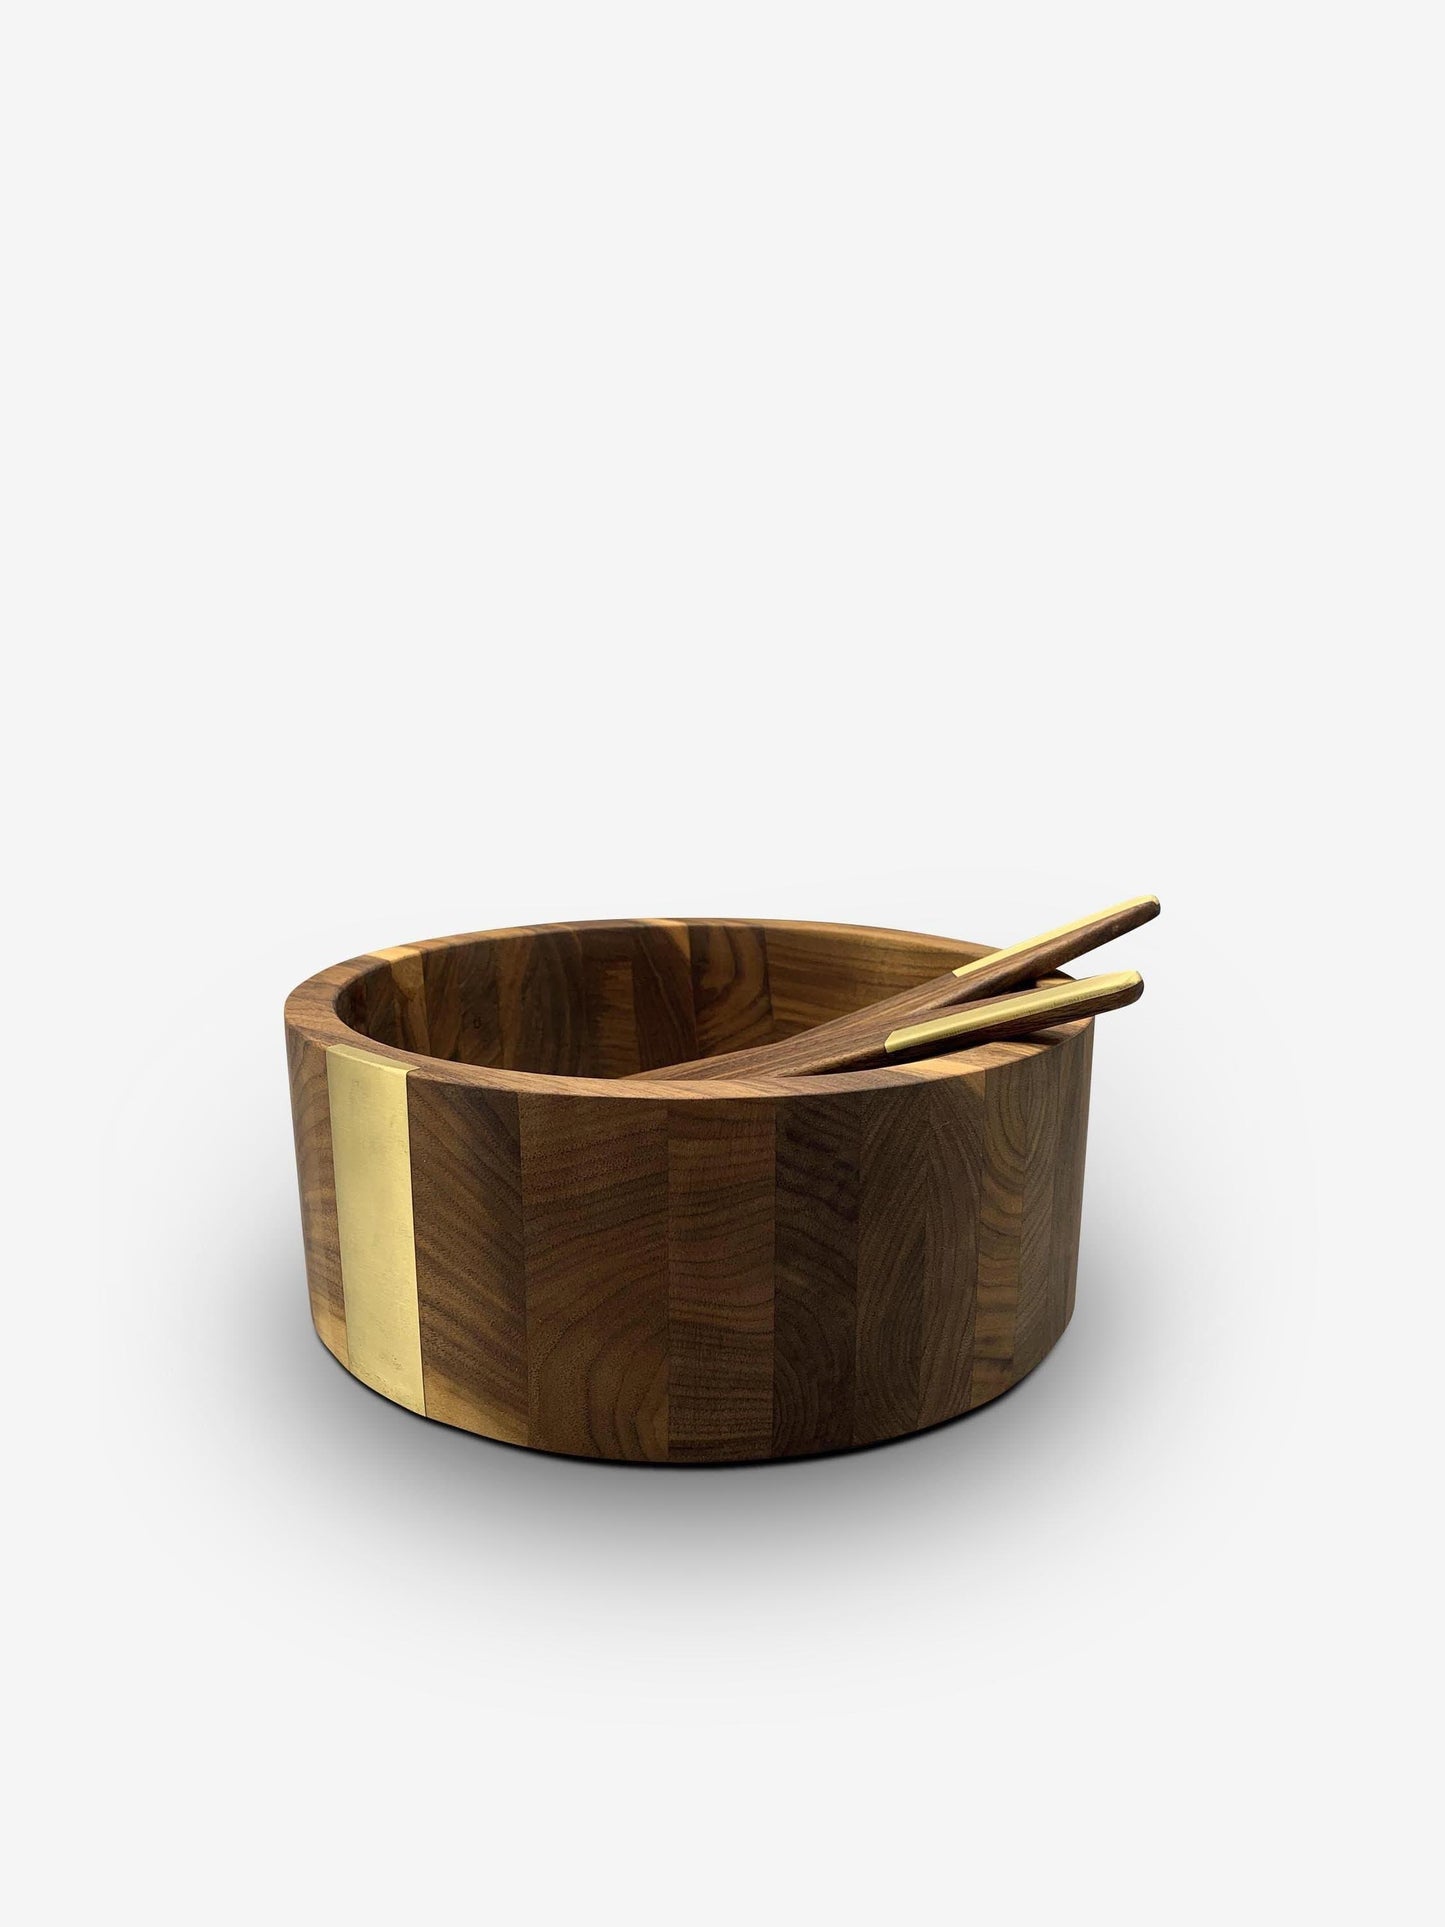 Angled Salad Server with Brass Inlay by The Wooden Palate